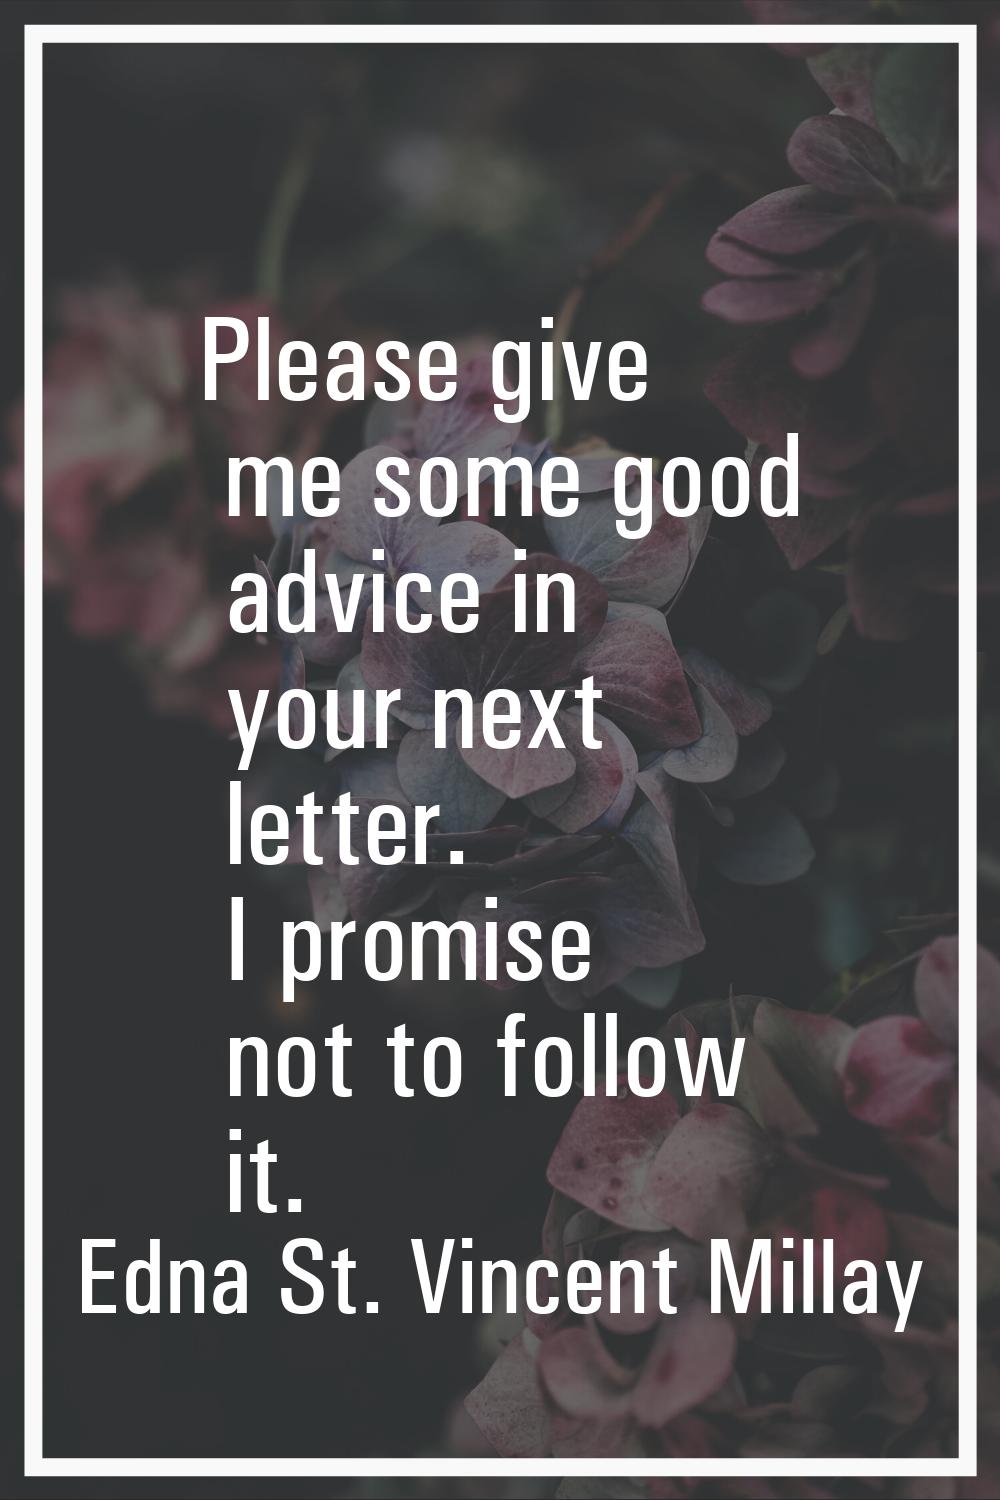 Please give me some good advice in your next letter. I promise not to follow it.